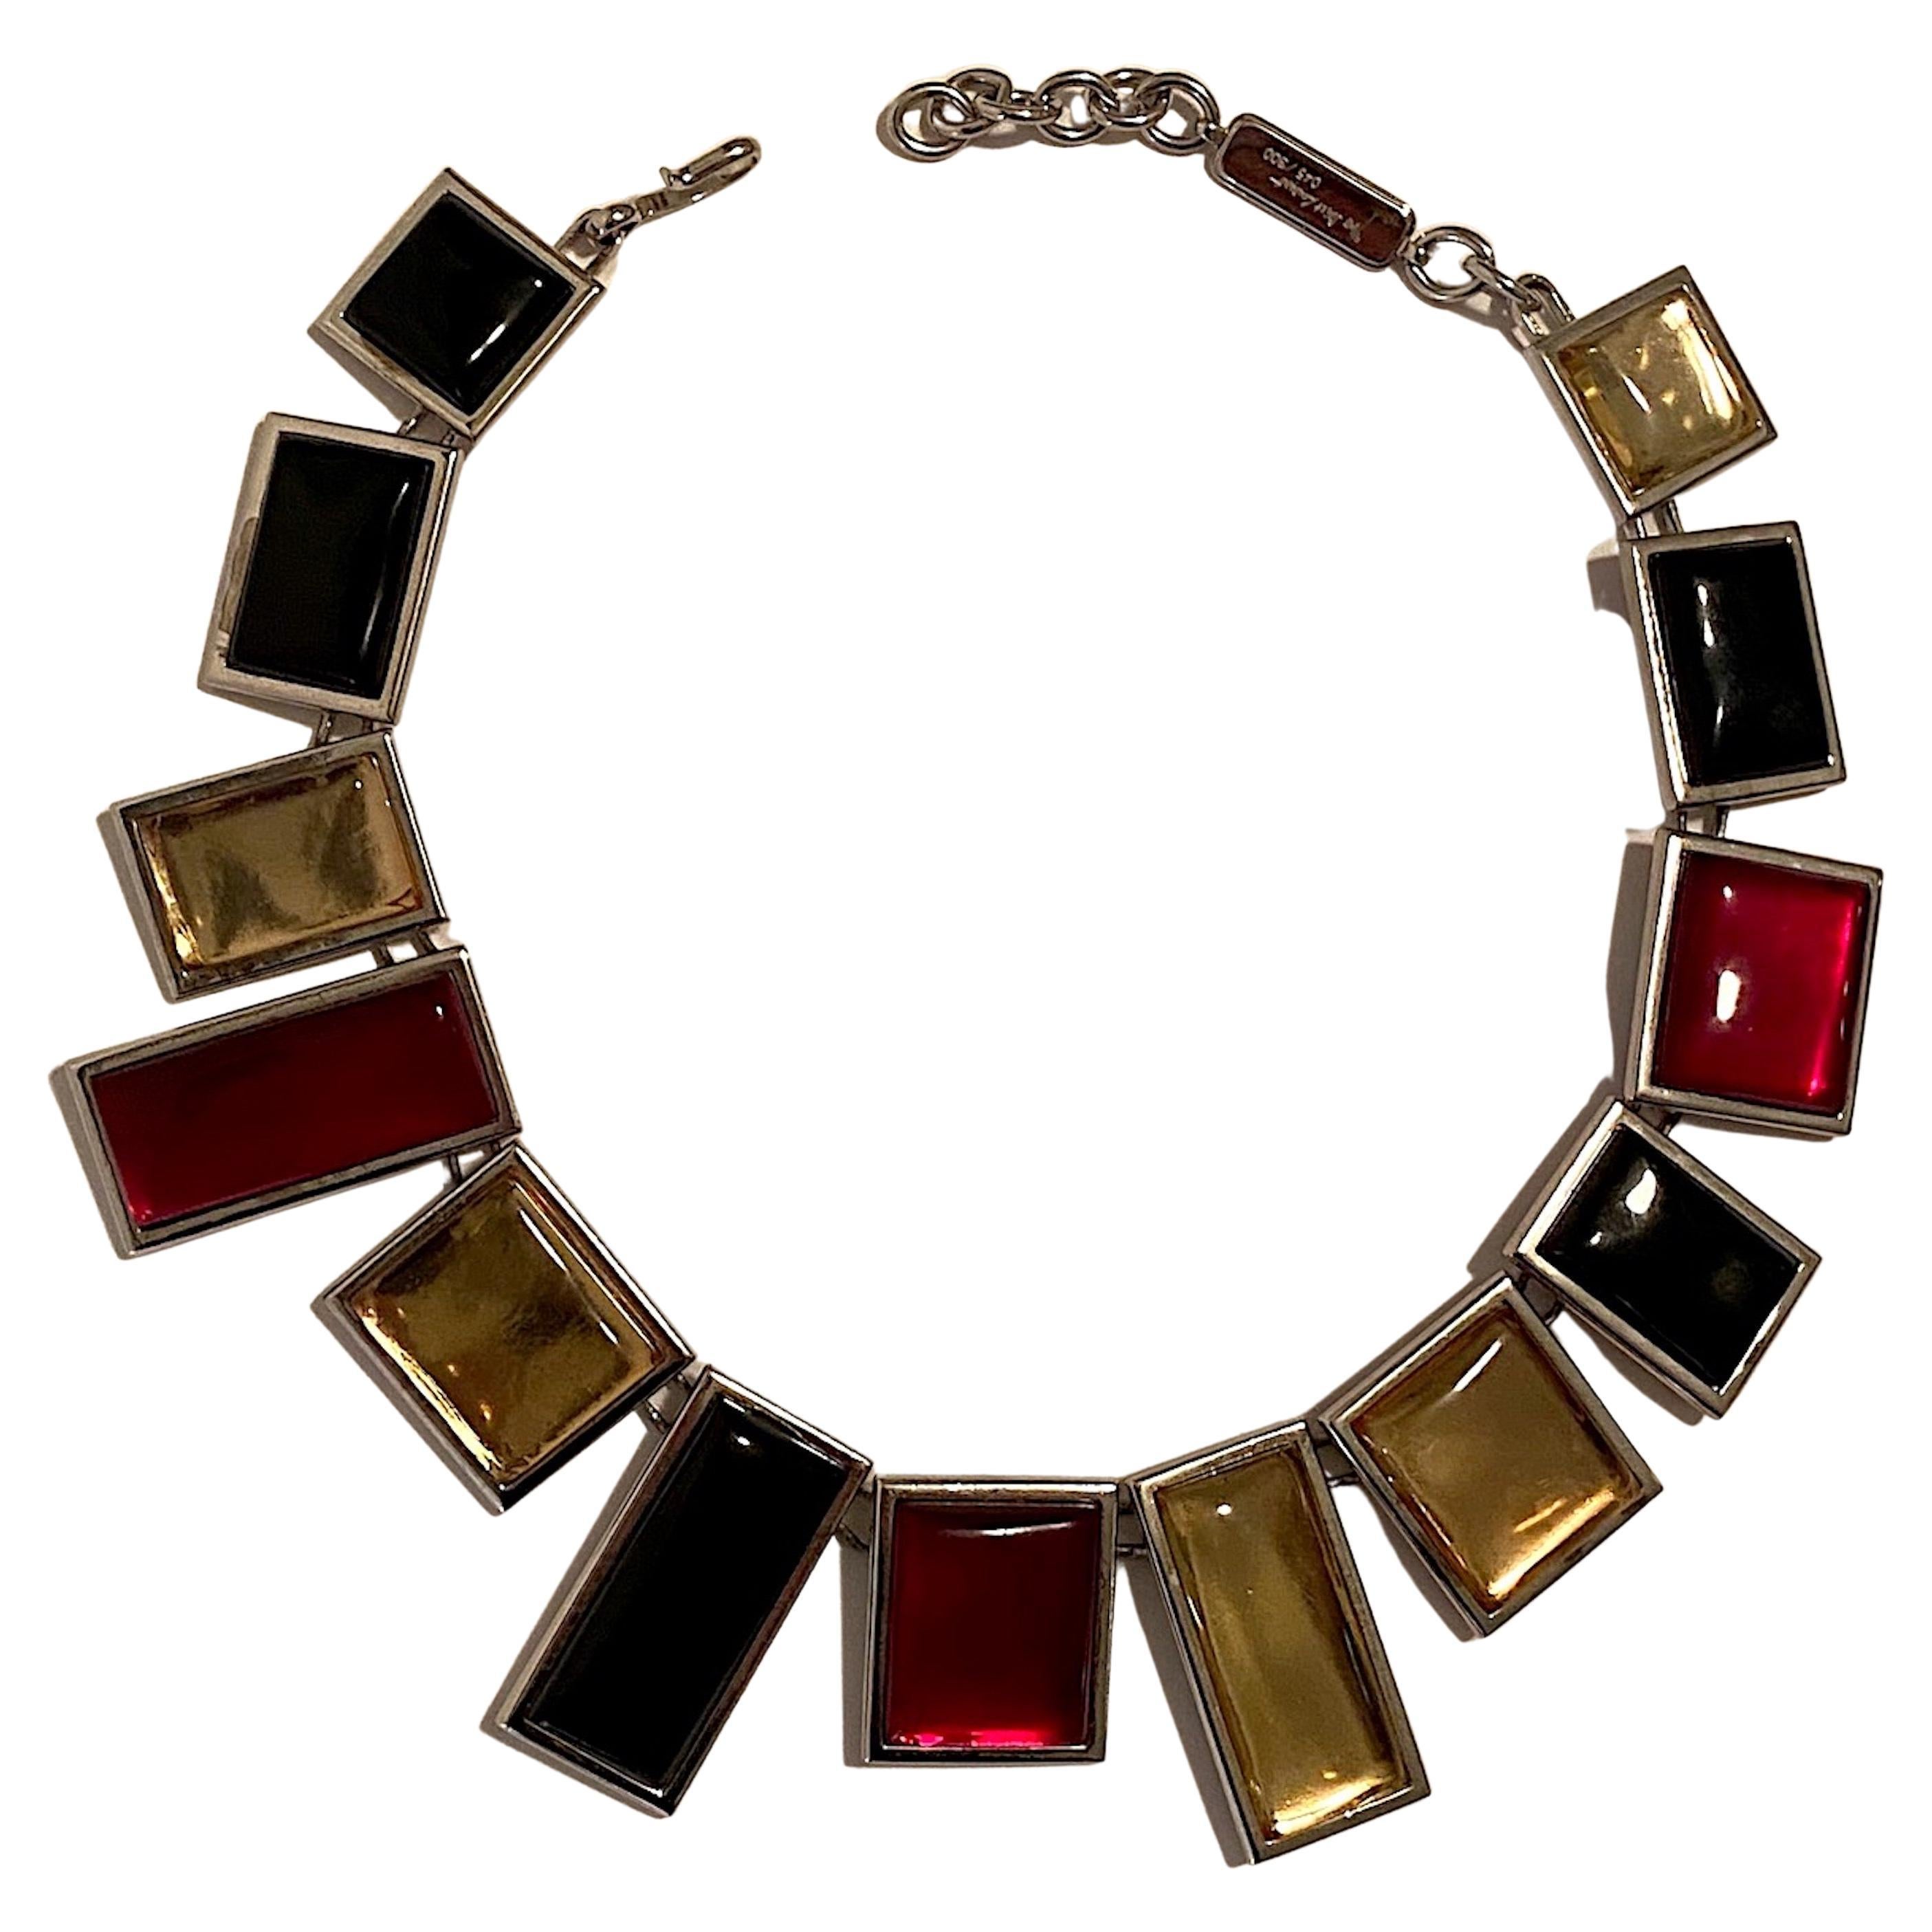 A beautiful vintage 1980s Yves Saint Laurent necklace designed by the famous French jewelry designer Robert Goossens (30 January 1927 – 7 January 2016). His jewelry designs are known to be the best pieces made for the fashion houses of Chanel, Dior